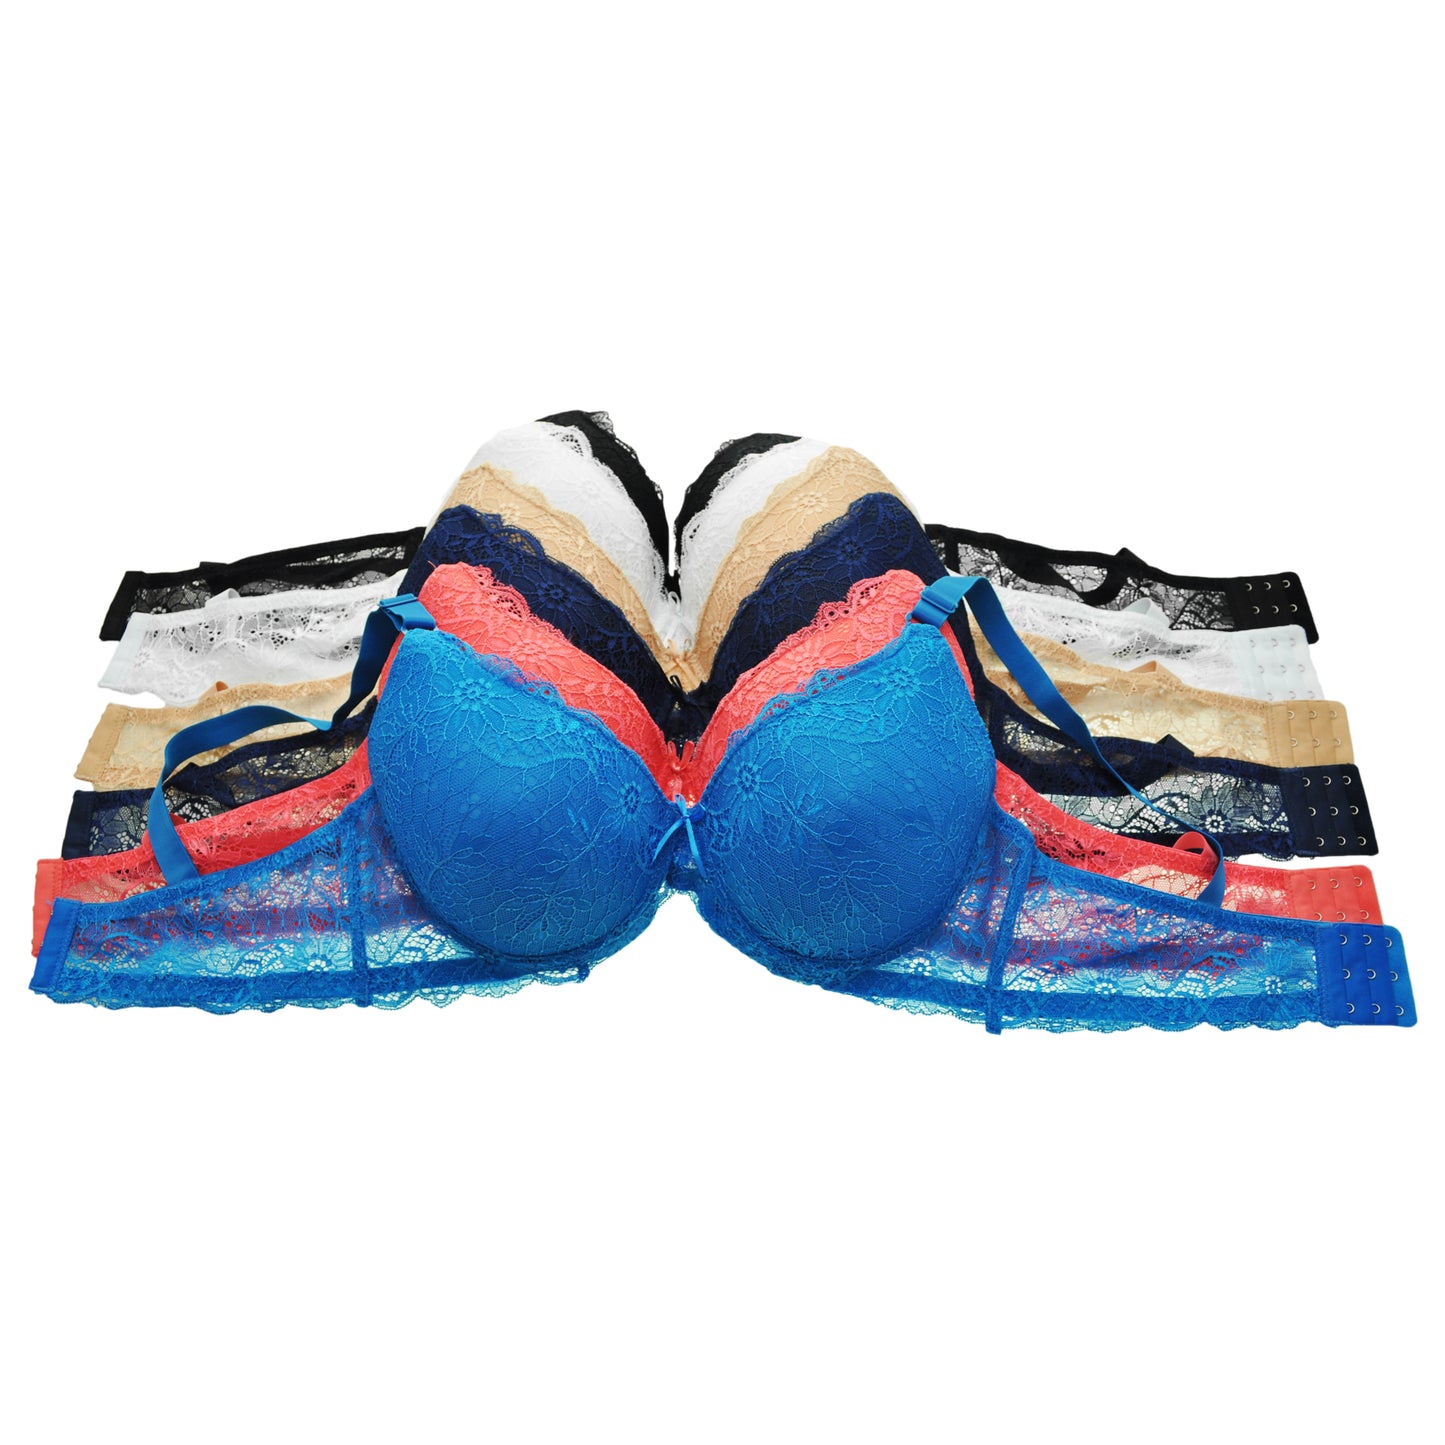 Wired Plus Size Bras with Floral Lace (6-Pack)